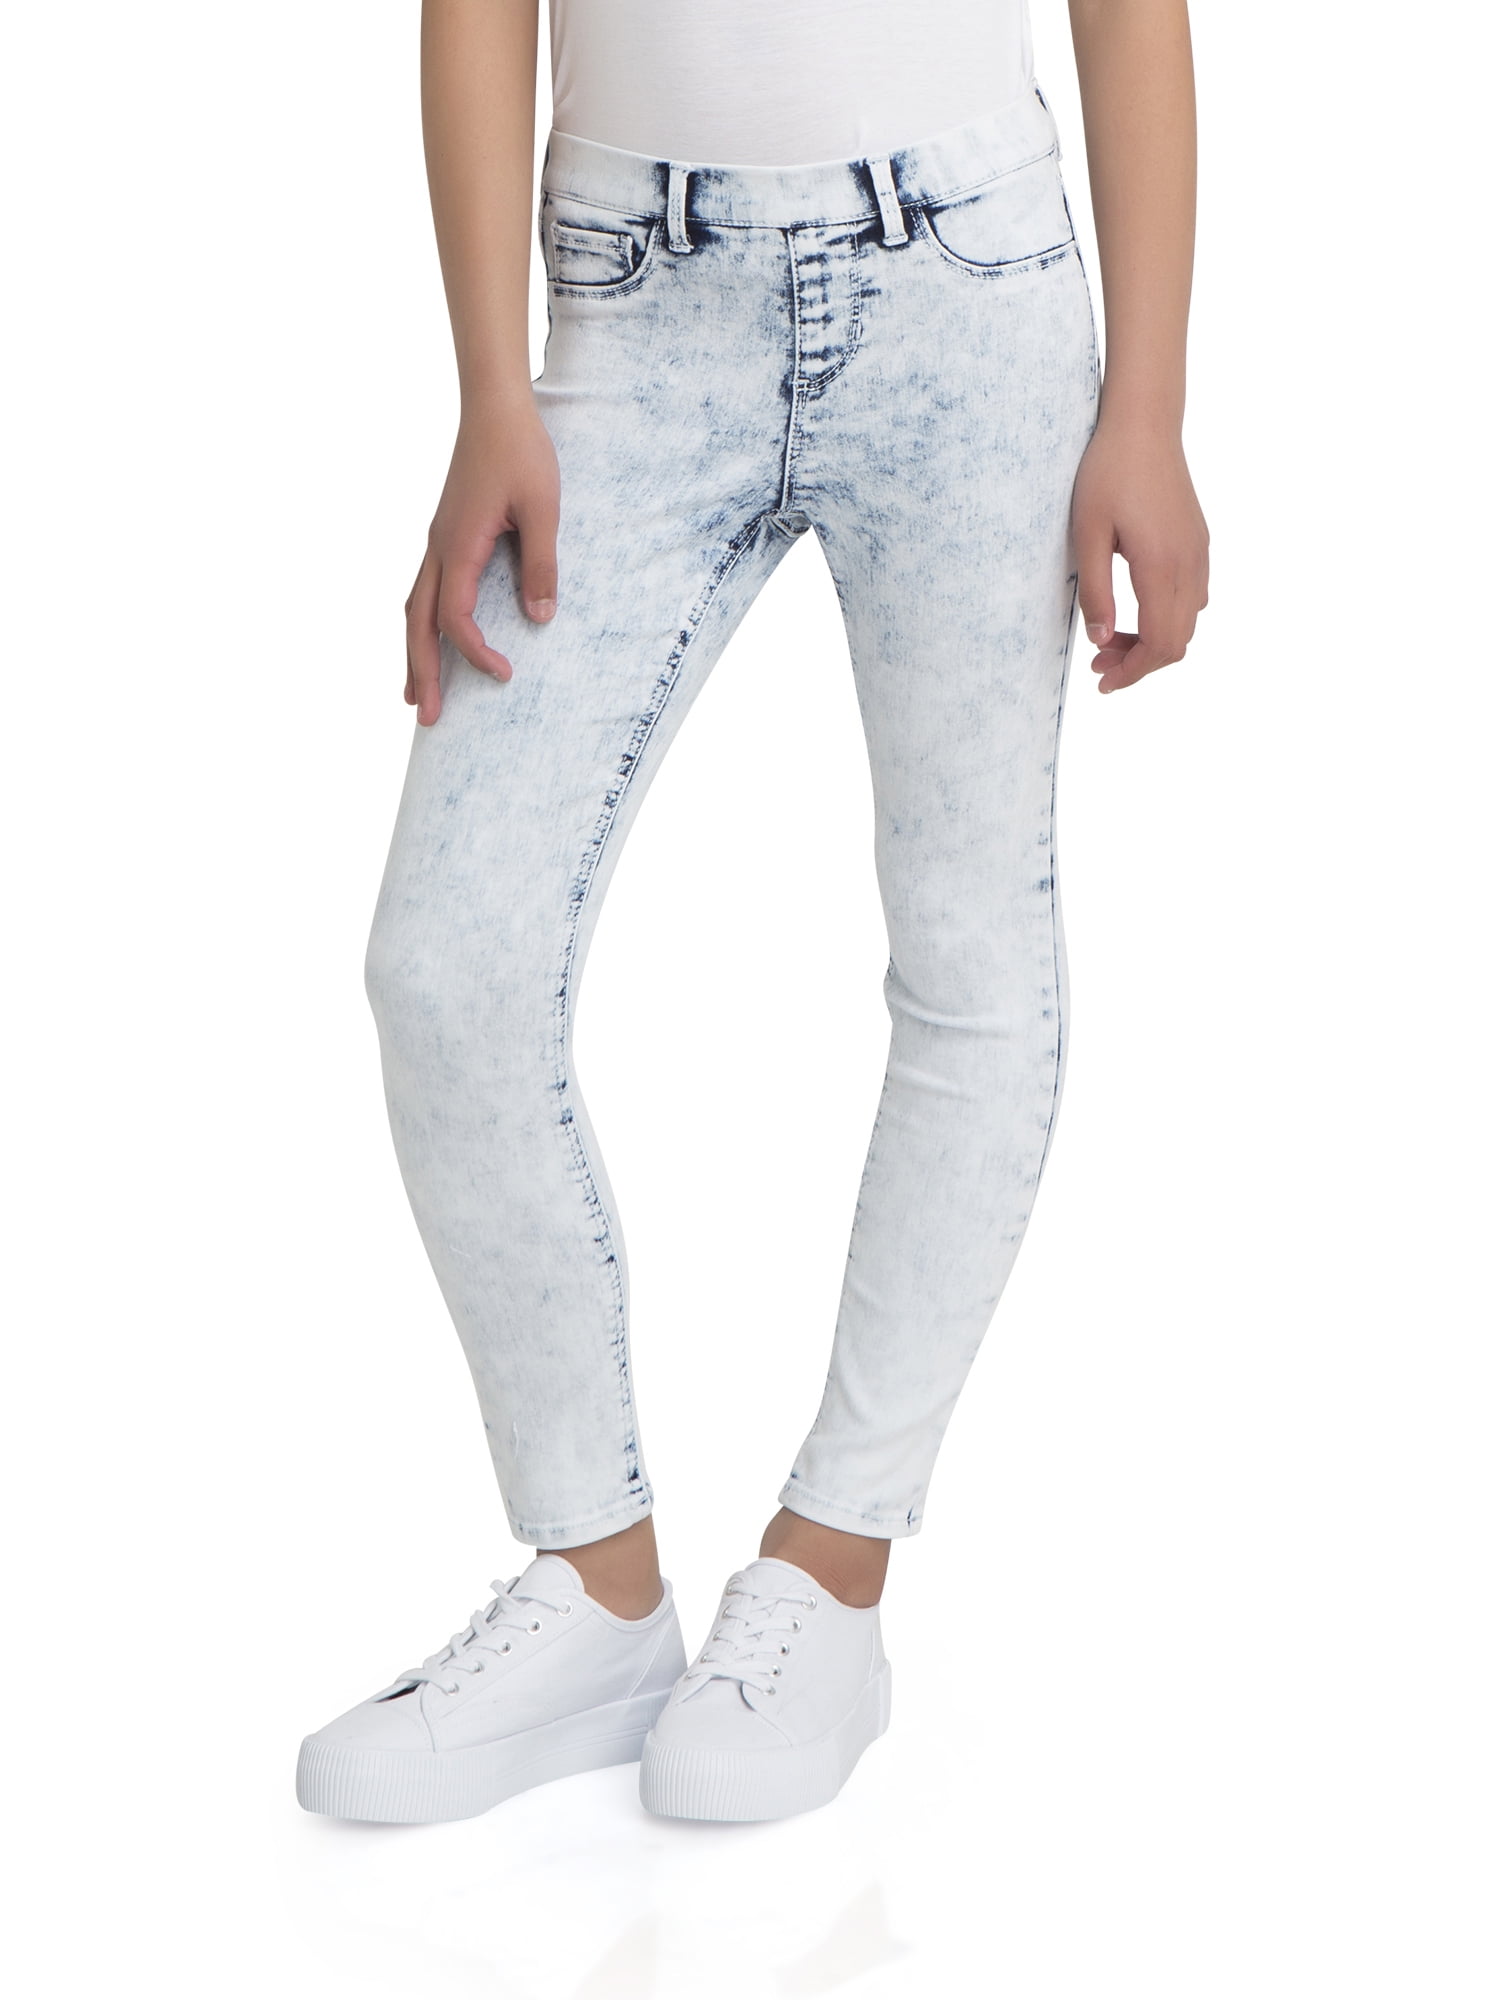 jeggings for 10 year olds